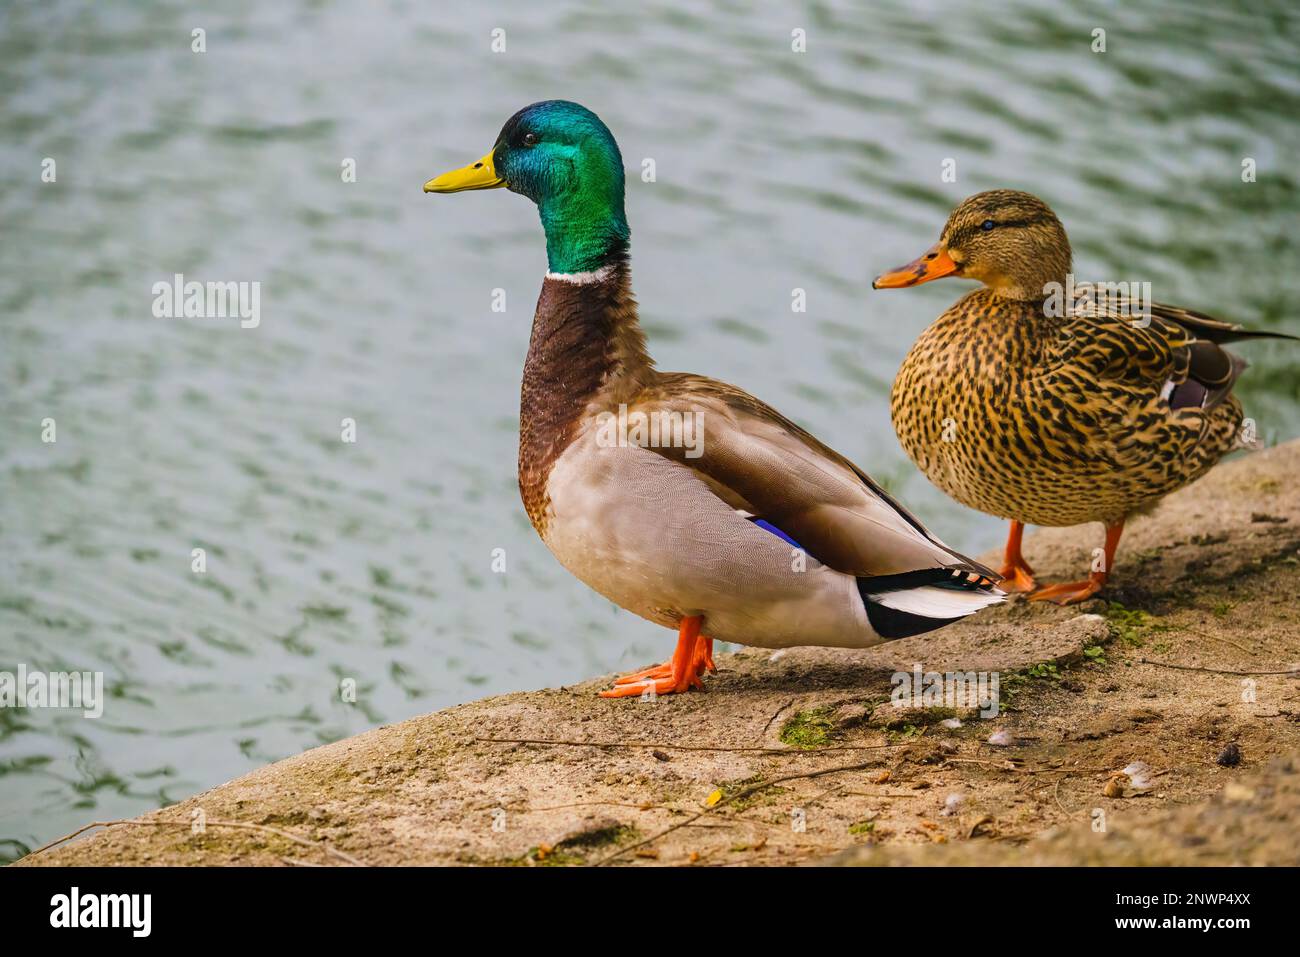 Mallard ducks (Anas platyrhynchos). Close-up portraits of a male and female wild ducks standing on the beach, close to the pond, green water with sun Stock Photo